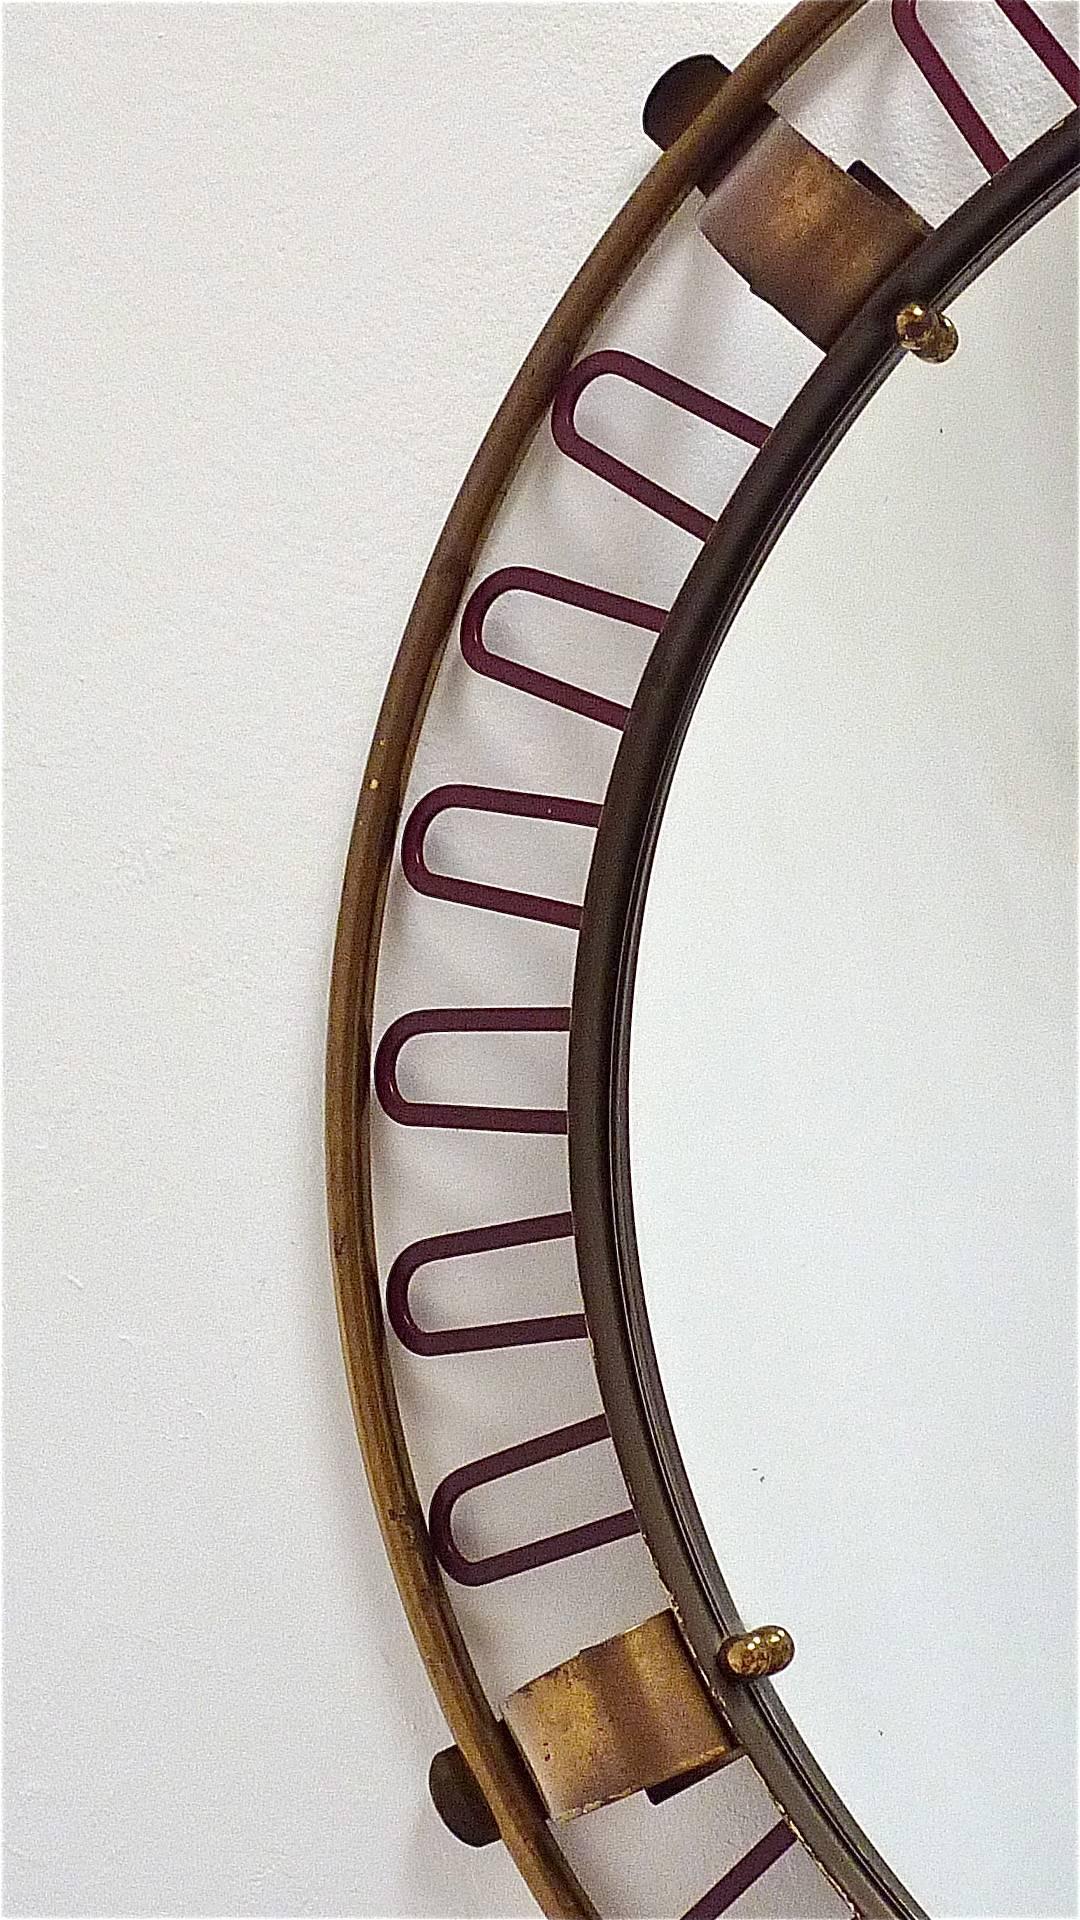 Jean Royère Style Illuminated Wall Mirror Patinated Brass Red Enameled (Französisch)